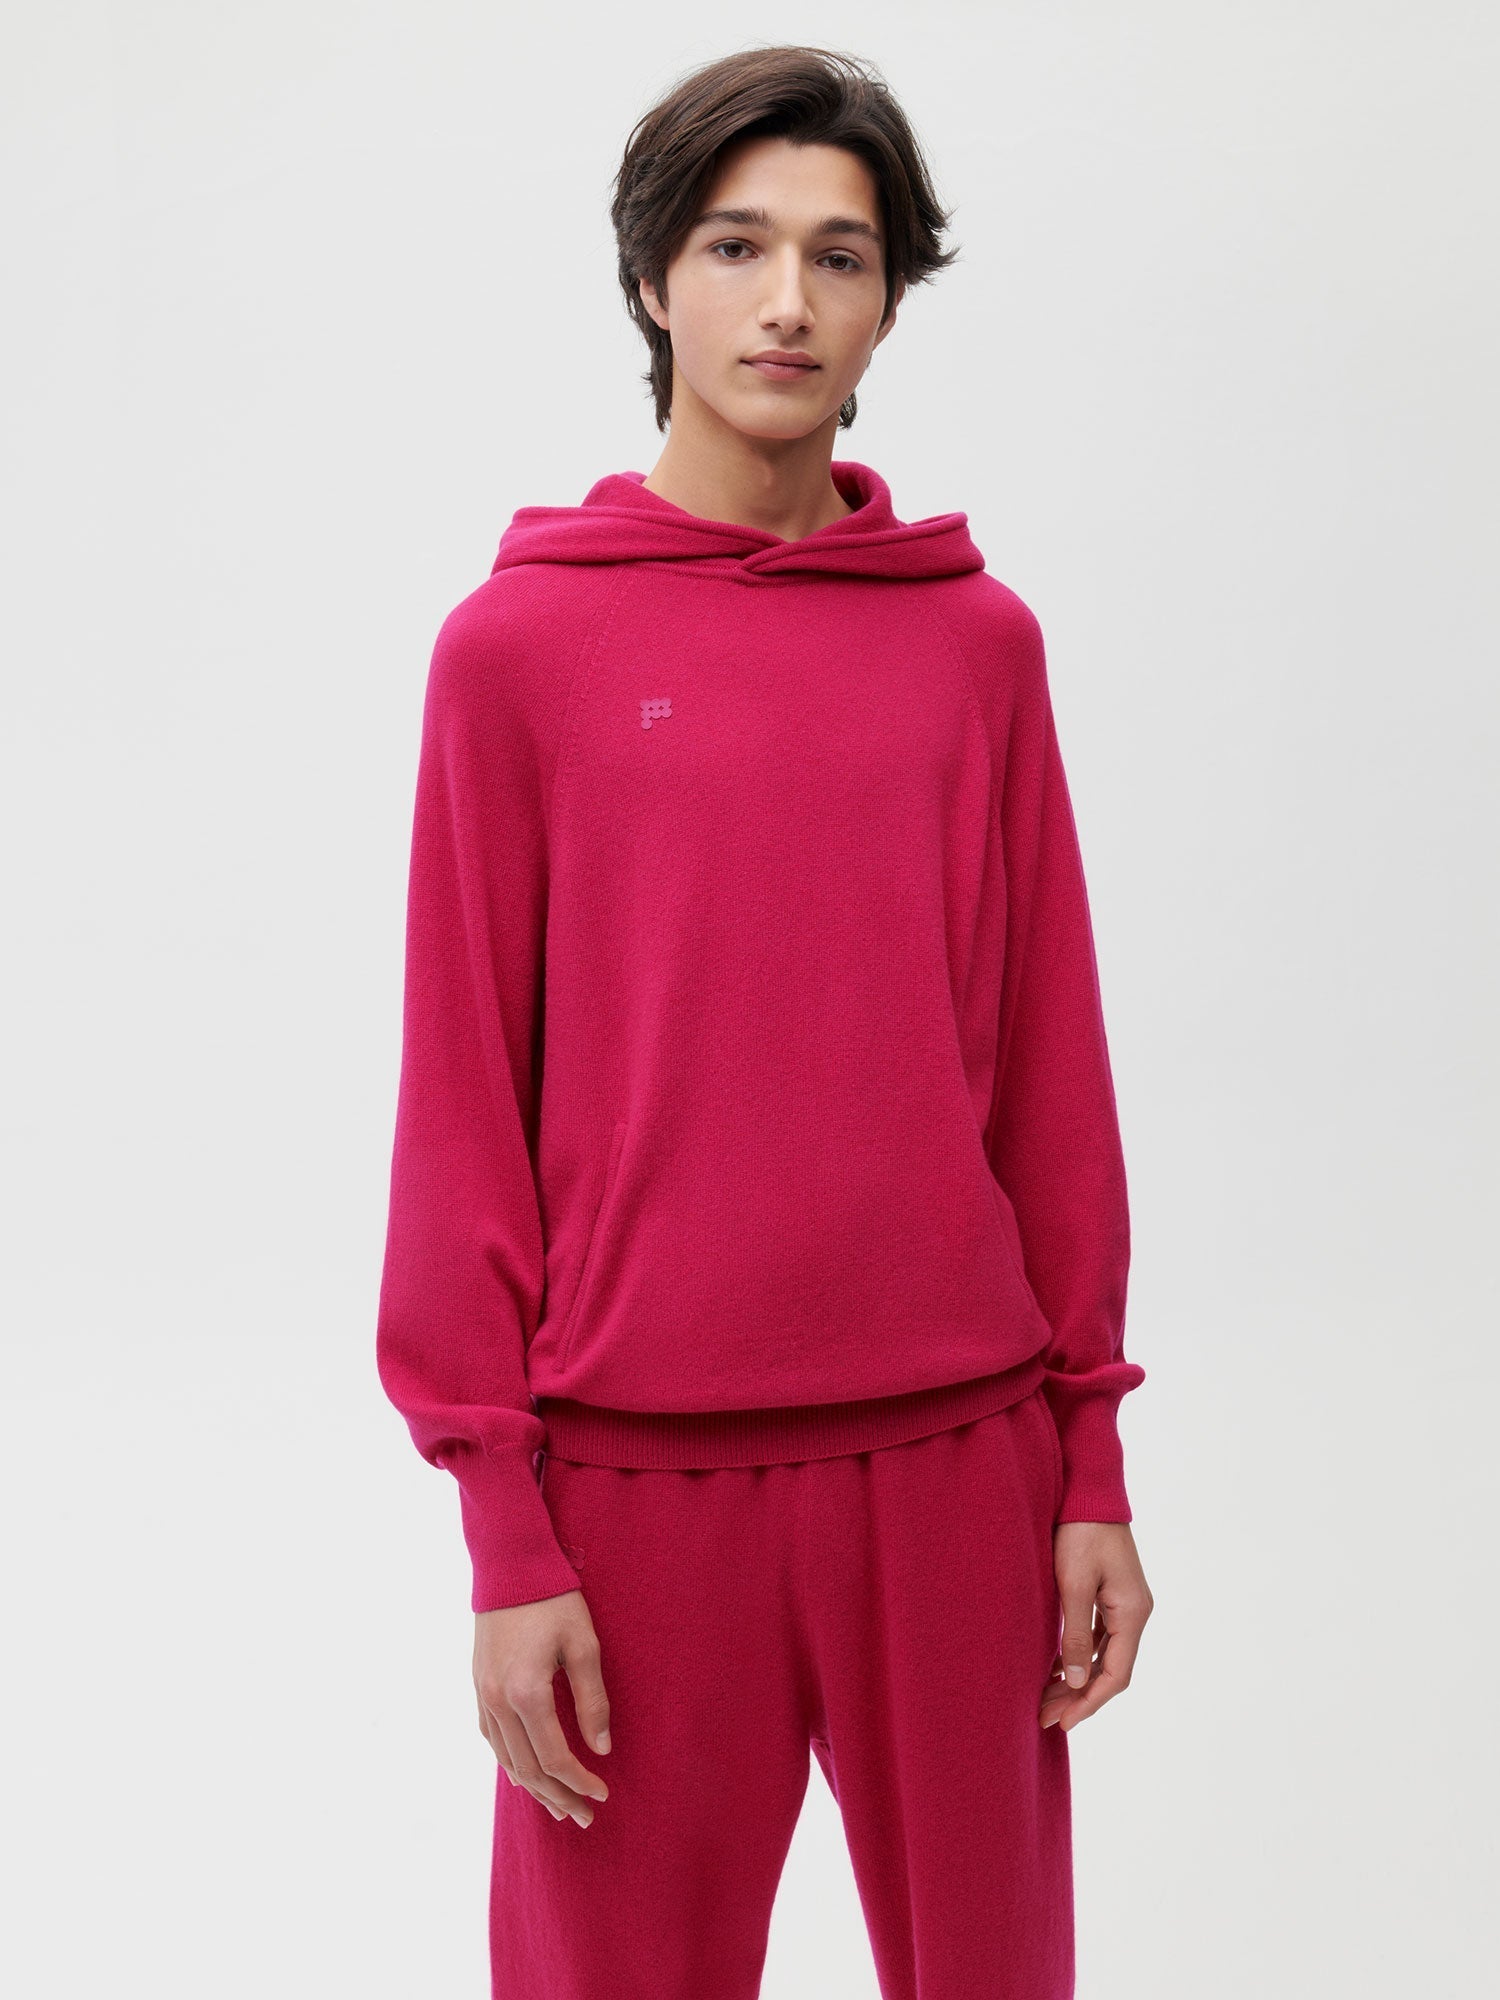 https://cdn.shopify.com/s/files/1/0035/1309/0115/products/Cashmere-Hoodie-Magenta-Pink-Male-1.jpg?v=1662476166